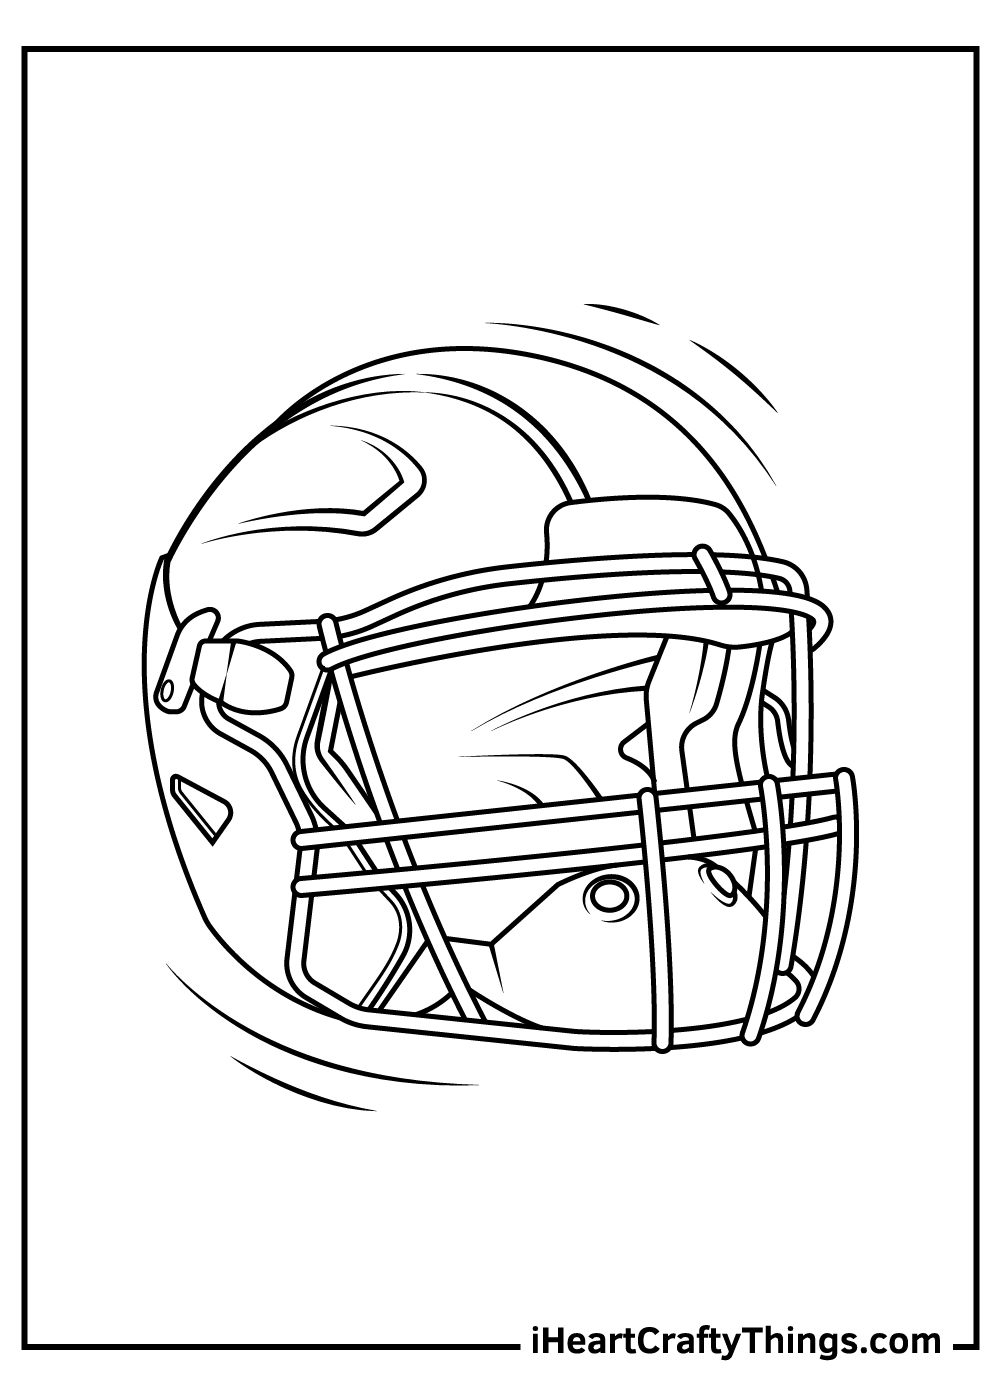 Nfl coloring pages updated